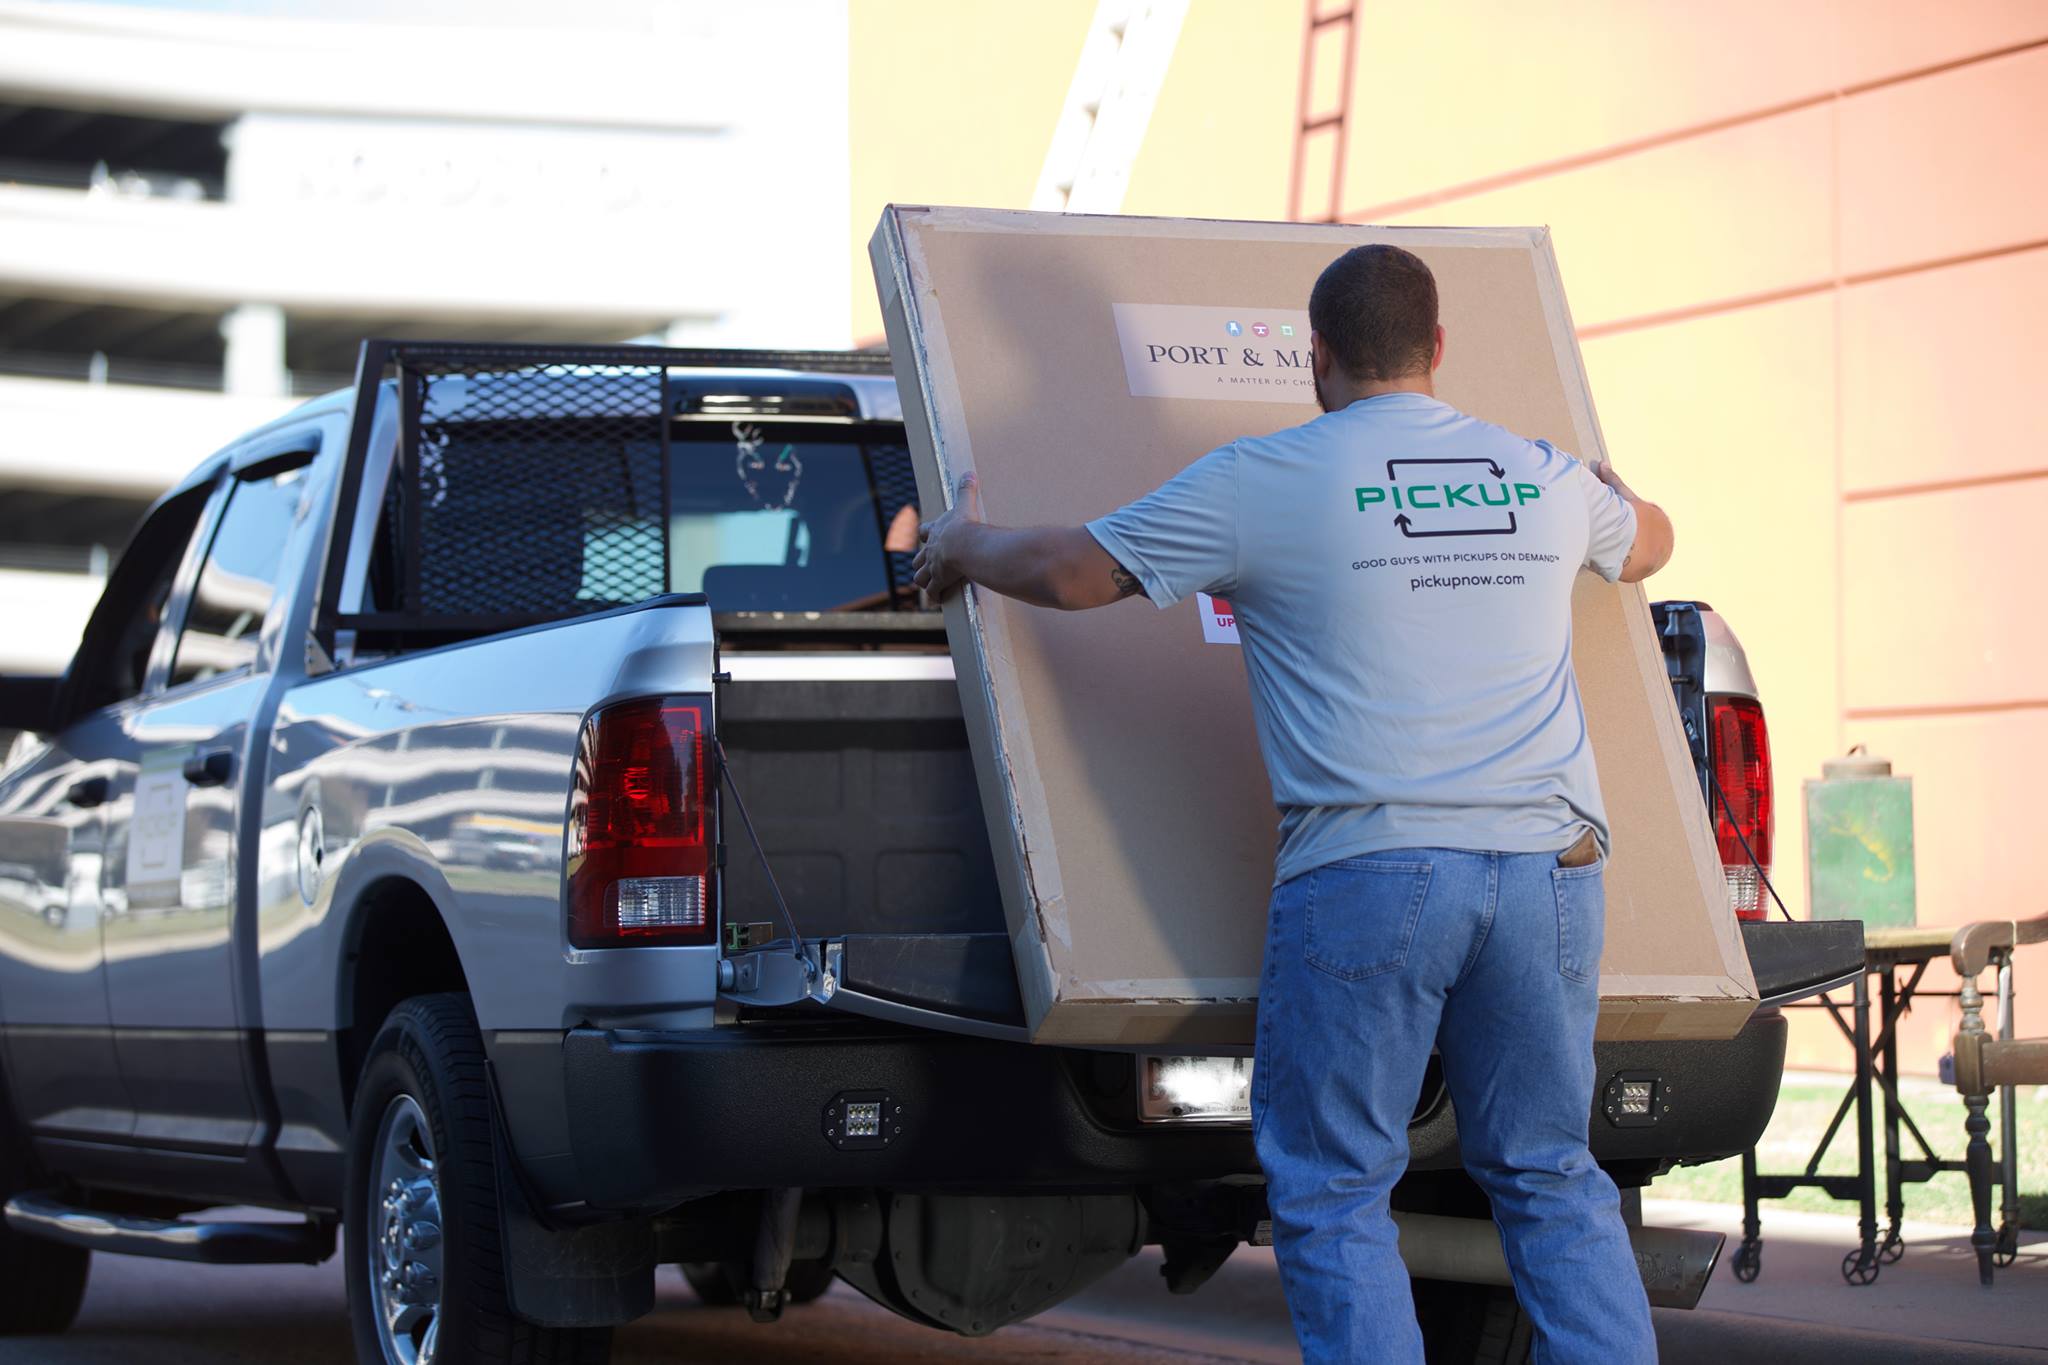 Need a pickup truck for moving? There's an app for that - Houston Chronicle2048 x 1365